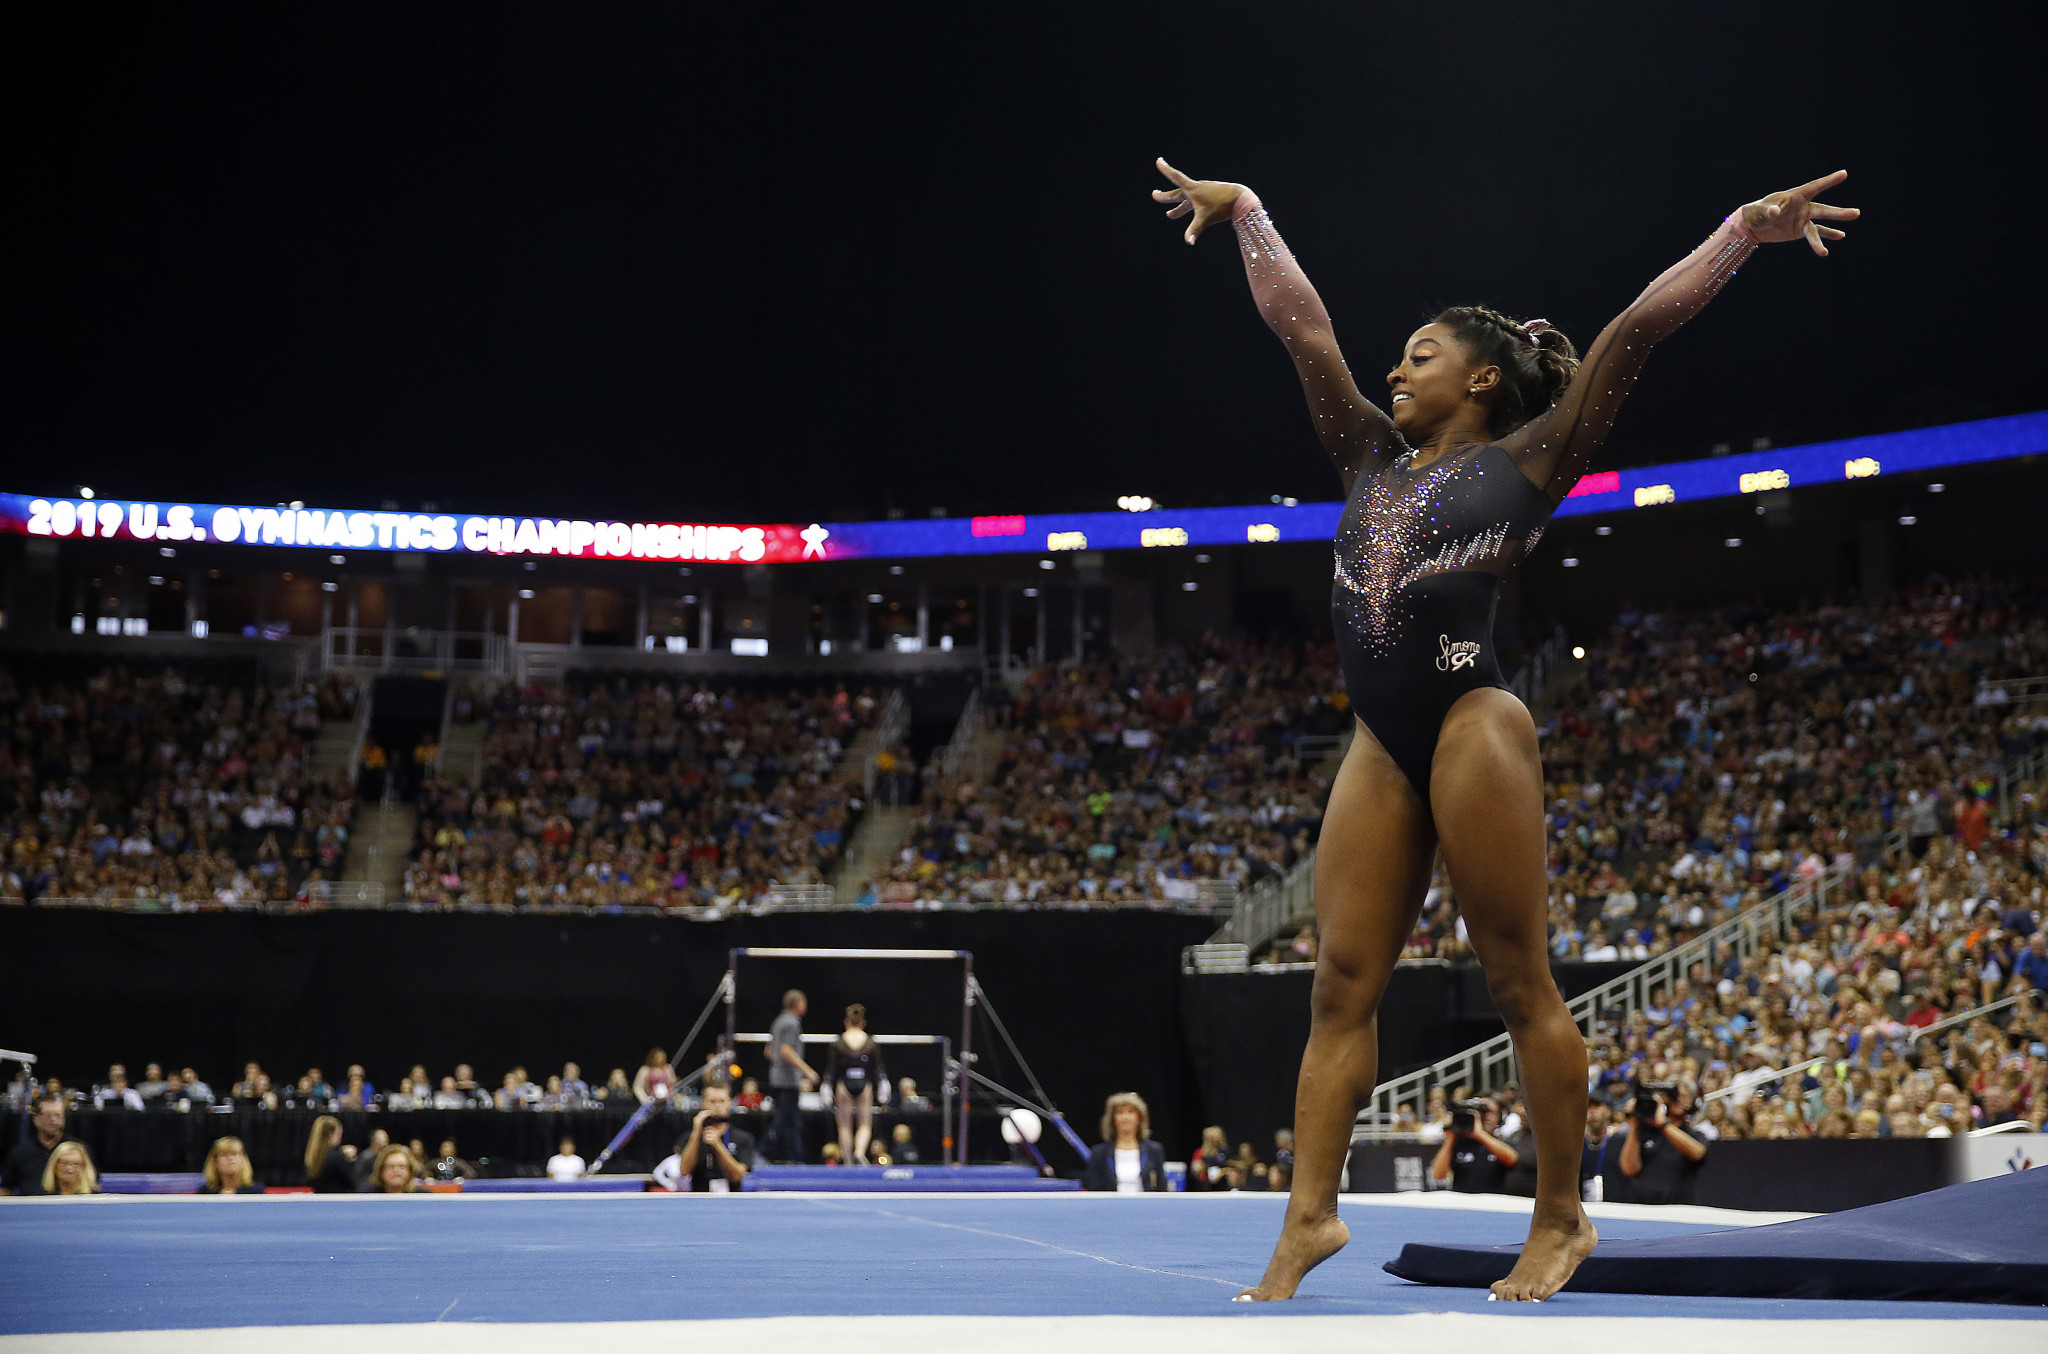 Biles and Burroughs among nominees for USOPC Best of August awards